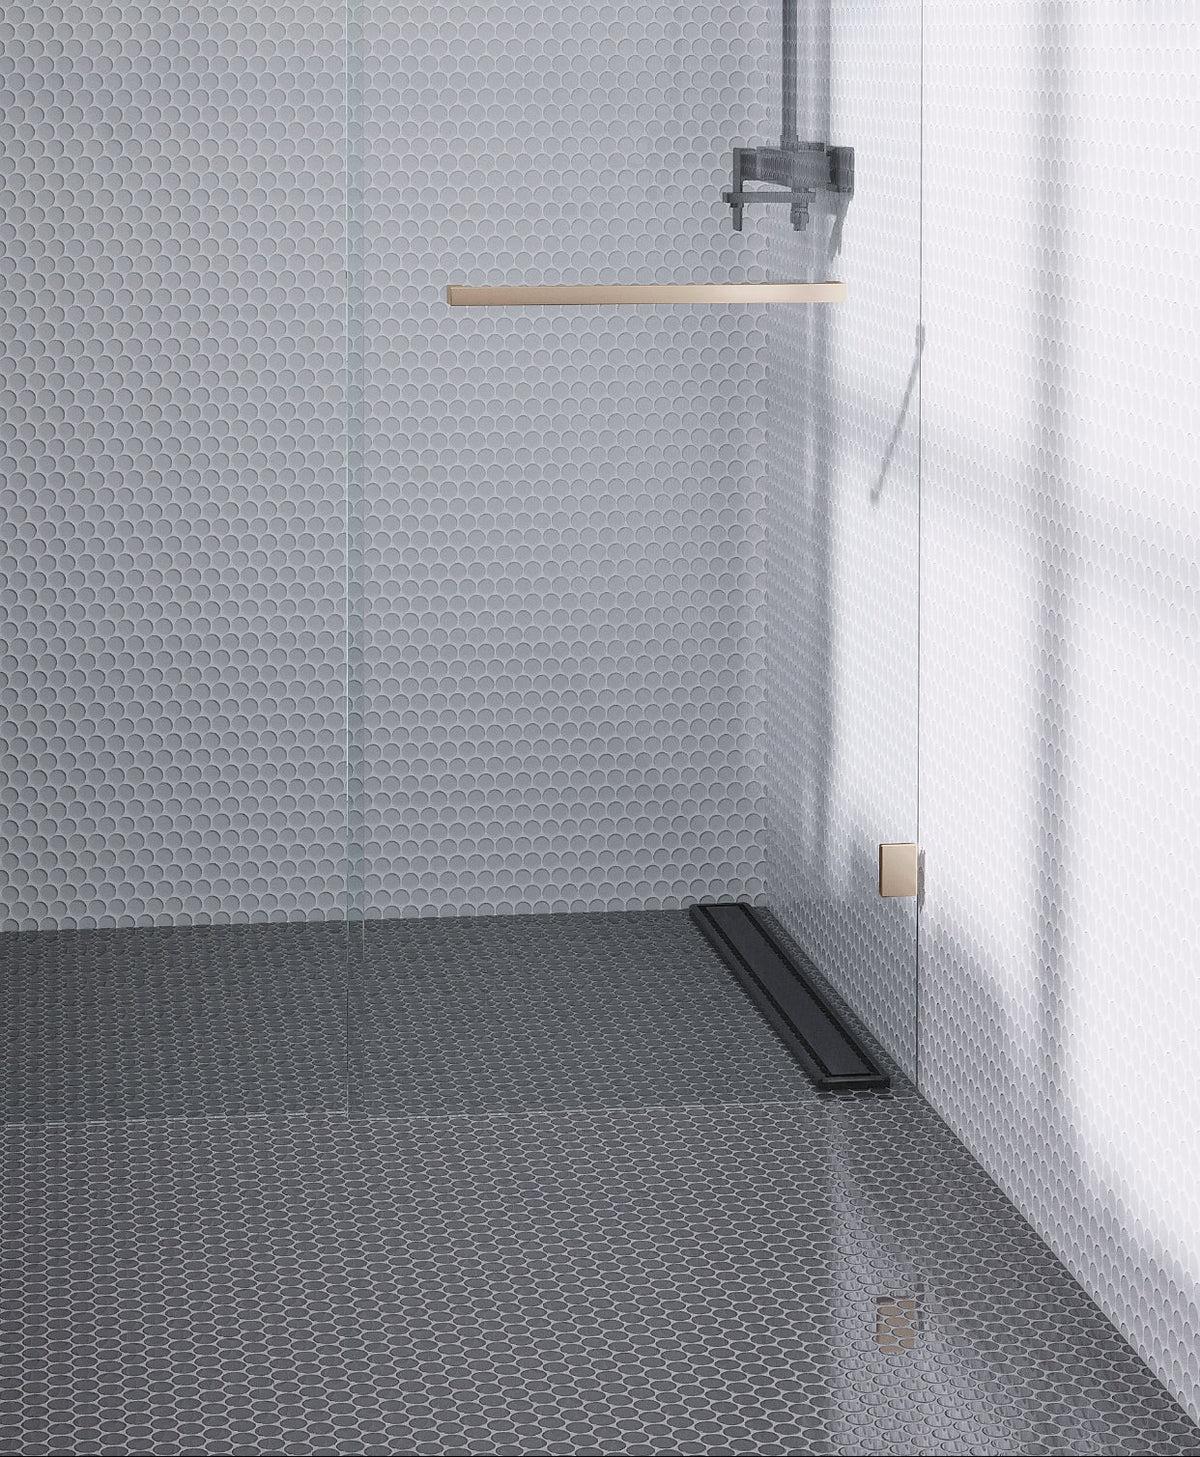 Cool Gray Penny Round Glass Tile Shower Floor